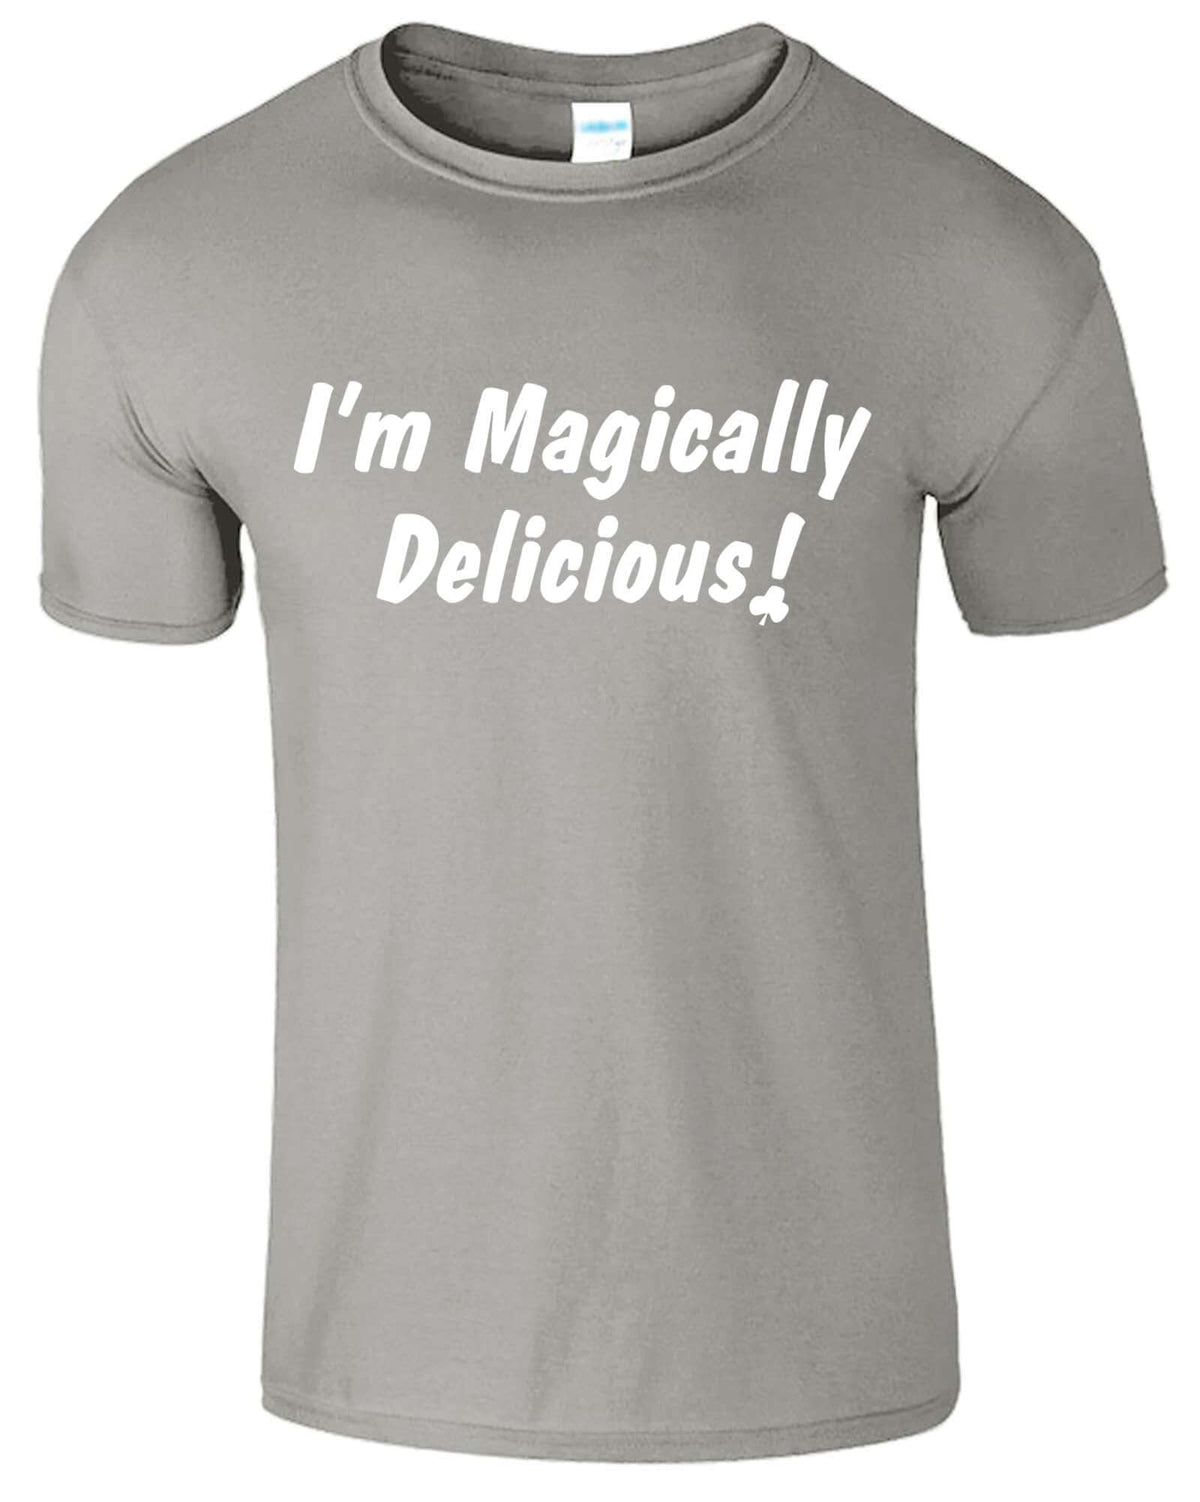 Magically Delicious Sarcastic Cool Funny Men's T-Shirt